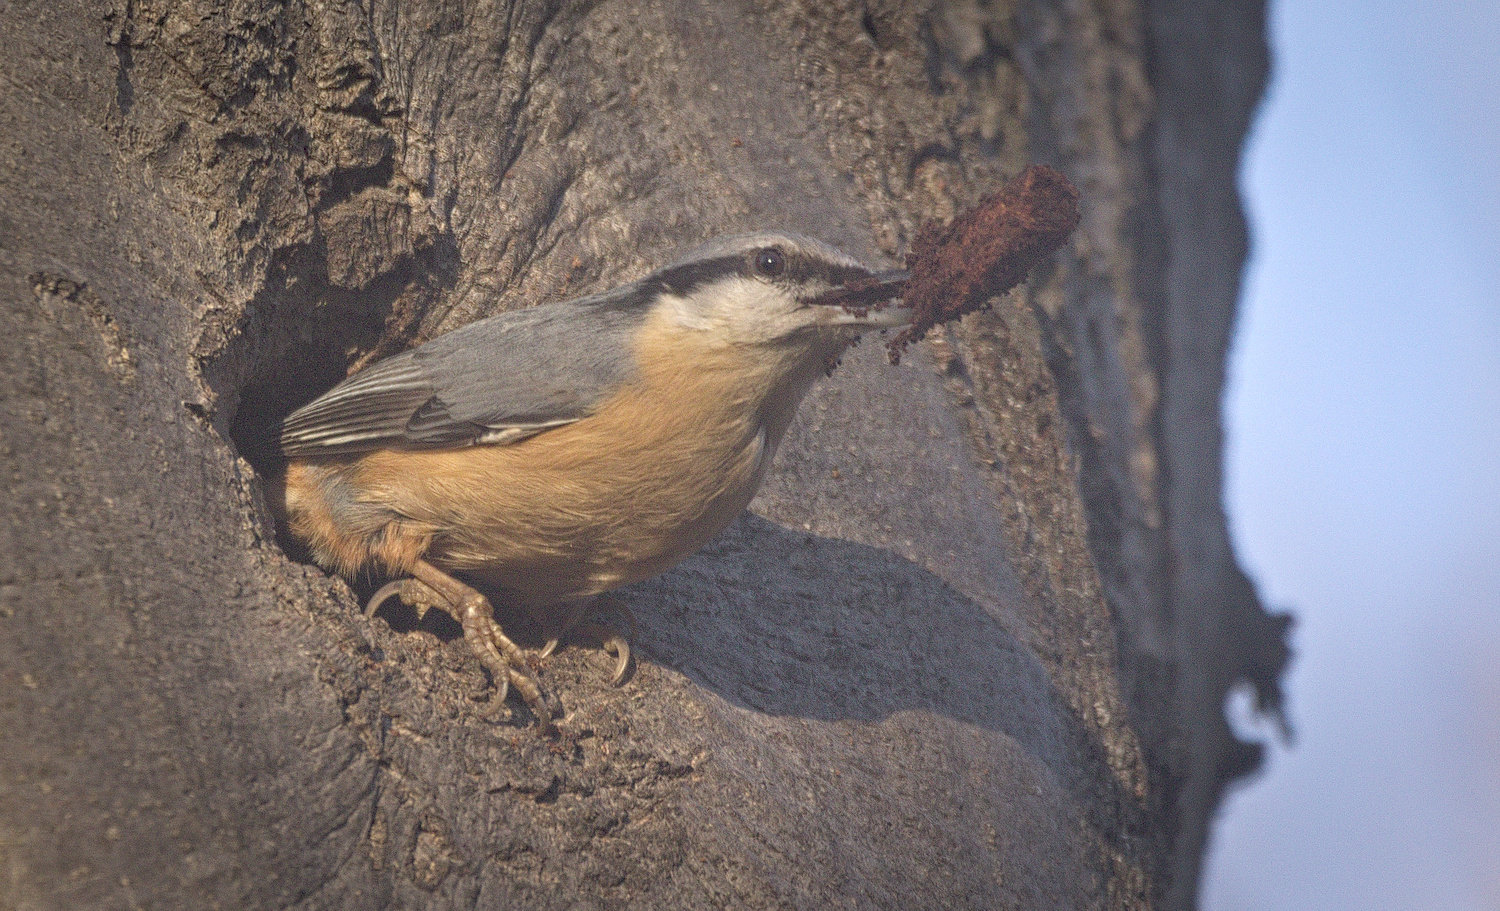 Spring cleaning isn’t just for humans. Here, a Eurasian nuthatch removes debris from a nesting hole in preparation for nesting season.